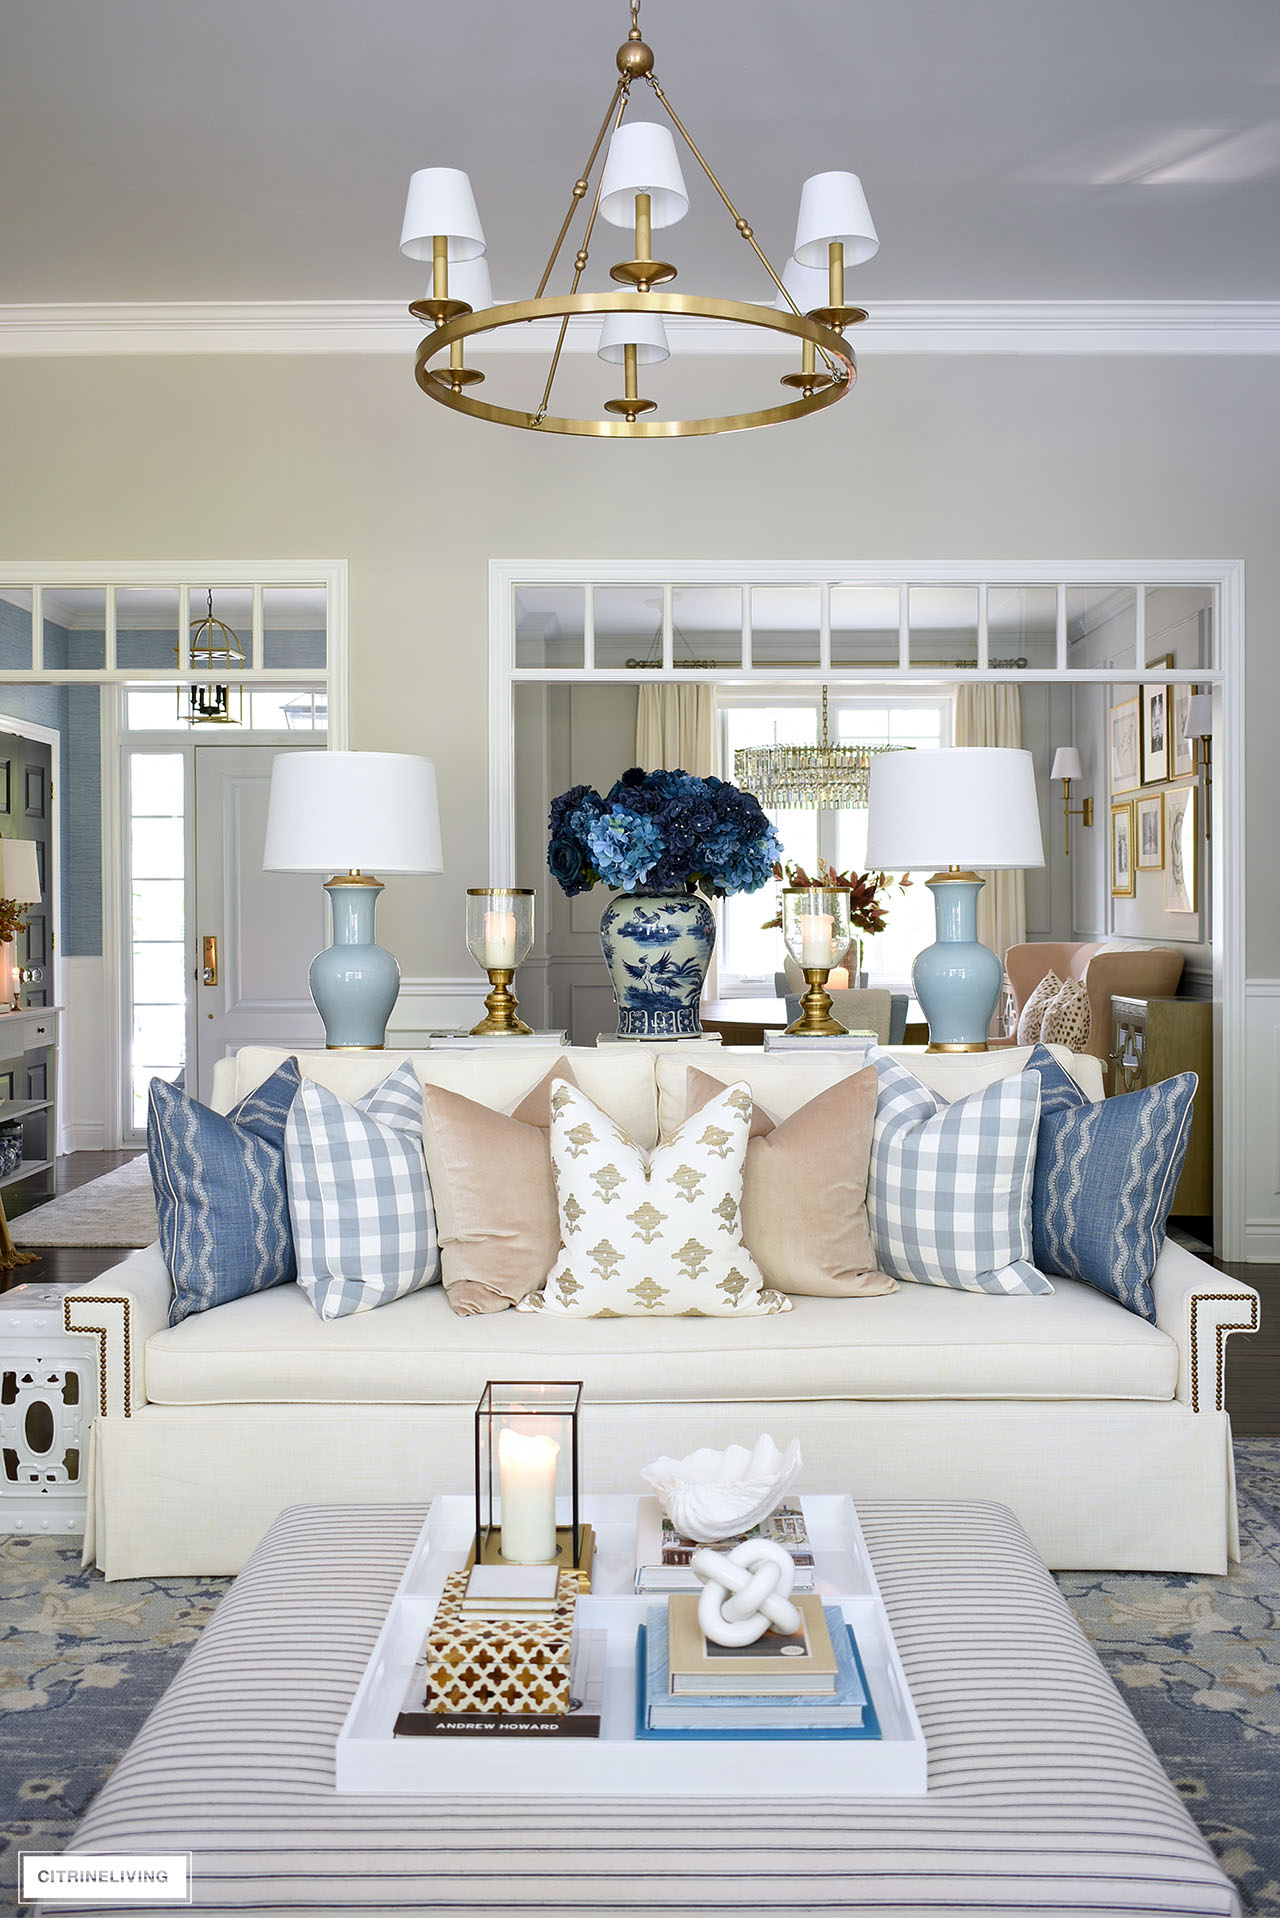 Ivory skirted sofa styled with luxe pillows in blue, tan and ivory